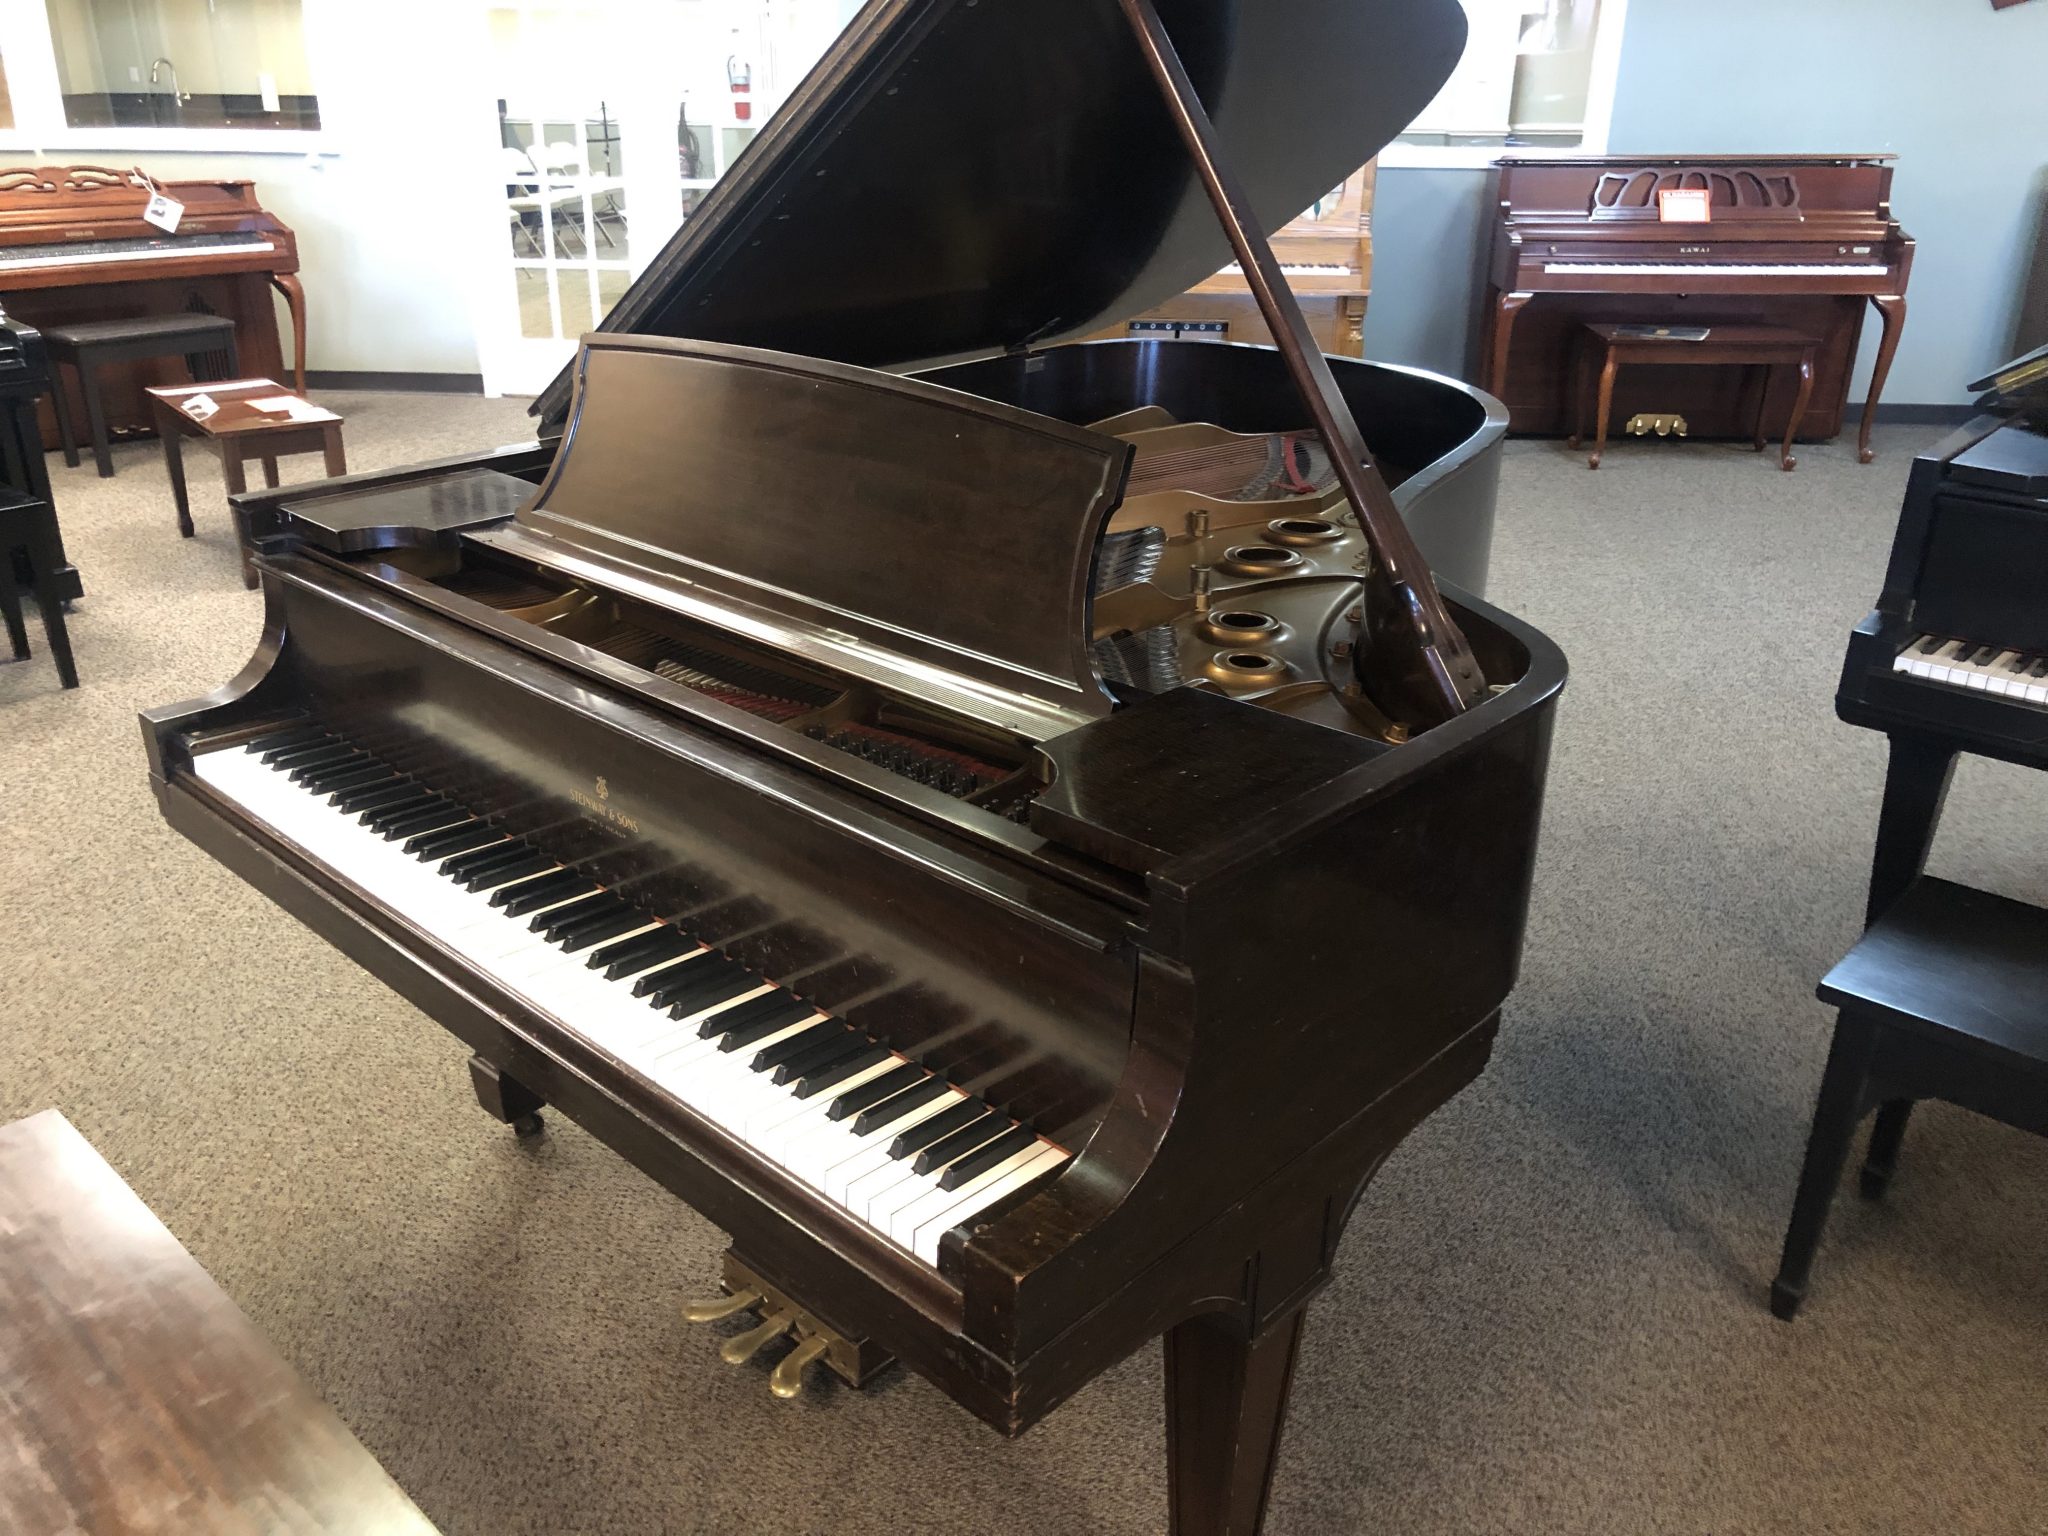 This is the 6'4" Long A. The Steinway Model A was redesigned a number of times during its production run, resulting in examples of the Model A existing in three different sizes (6', 6'2'', and 6'4'').  The A-III (also known as the 'Long A') is the 6'4'' version which was produced from 1913 to 1945. Its limited production run means that the A-III is the rarest of the different versions of the A, and it is sought-after for its remarkable tone and power. Many have commented that the A-III rivals the Steinway B in volume and tonal output. Some speculate that this is why Steinway reverted to smaller versions of the A in their Hamburg factory in the 1940s (and discontinued production entirely in New York for over 50 years), as the A-III presented buyers with a musically attractive alternative to the larger (and more expensive) Model B.